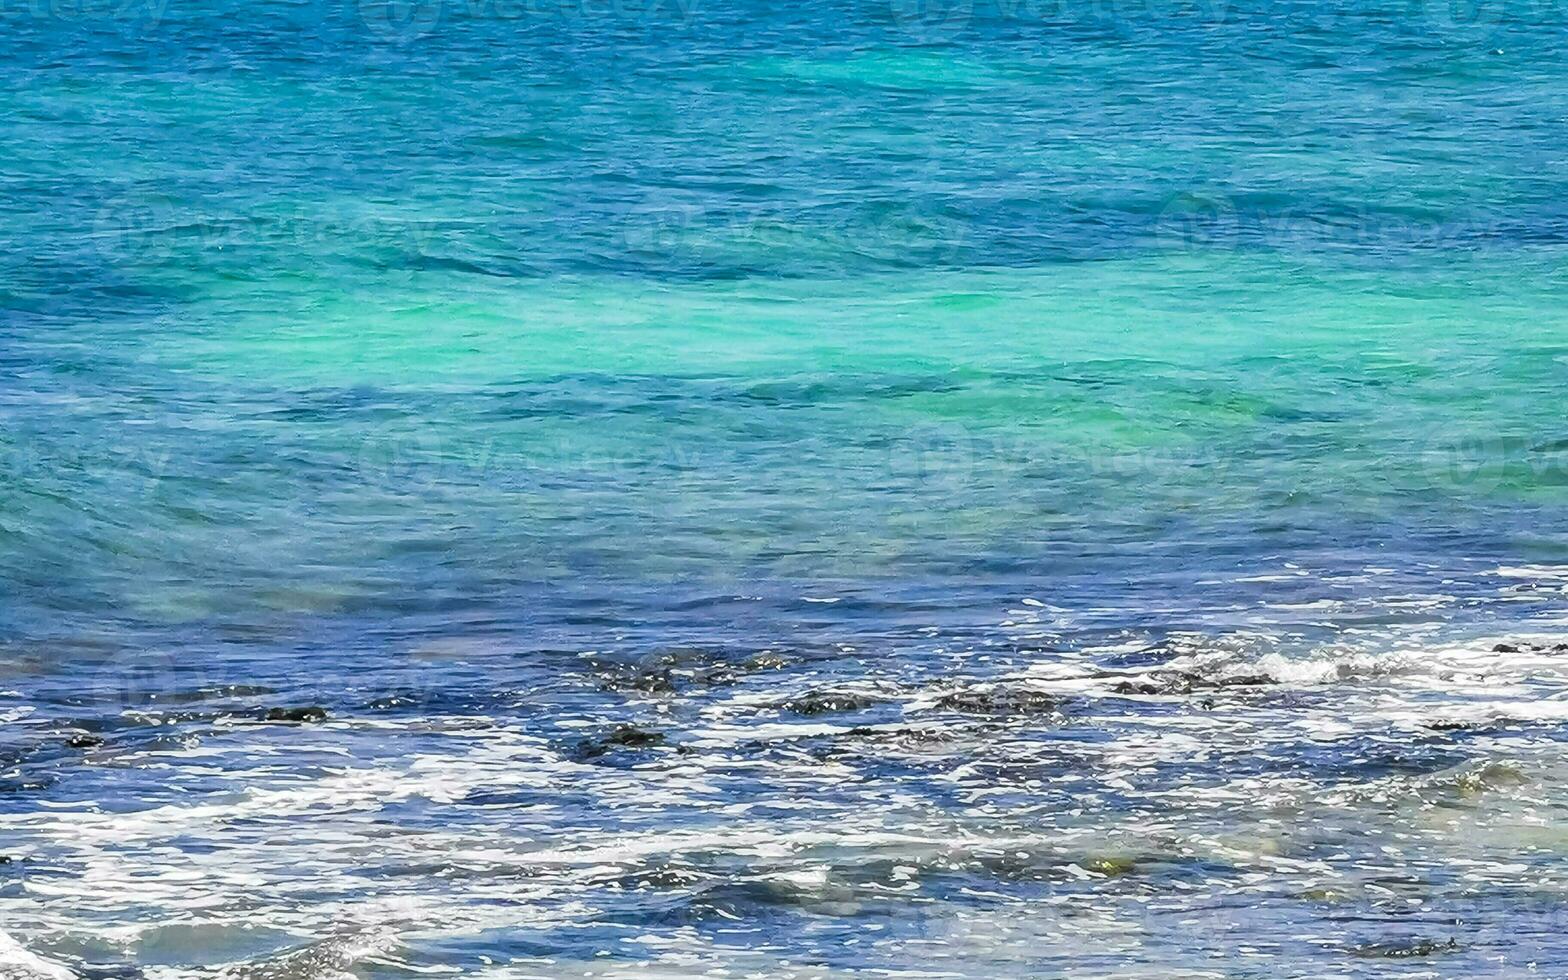 Stones rocks corals turquoise green blue water on beach Mexico. photo